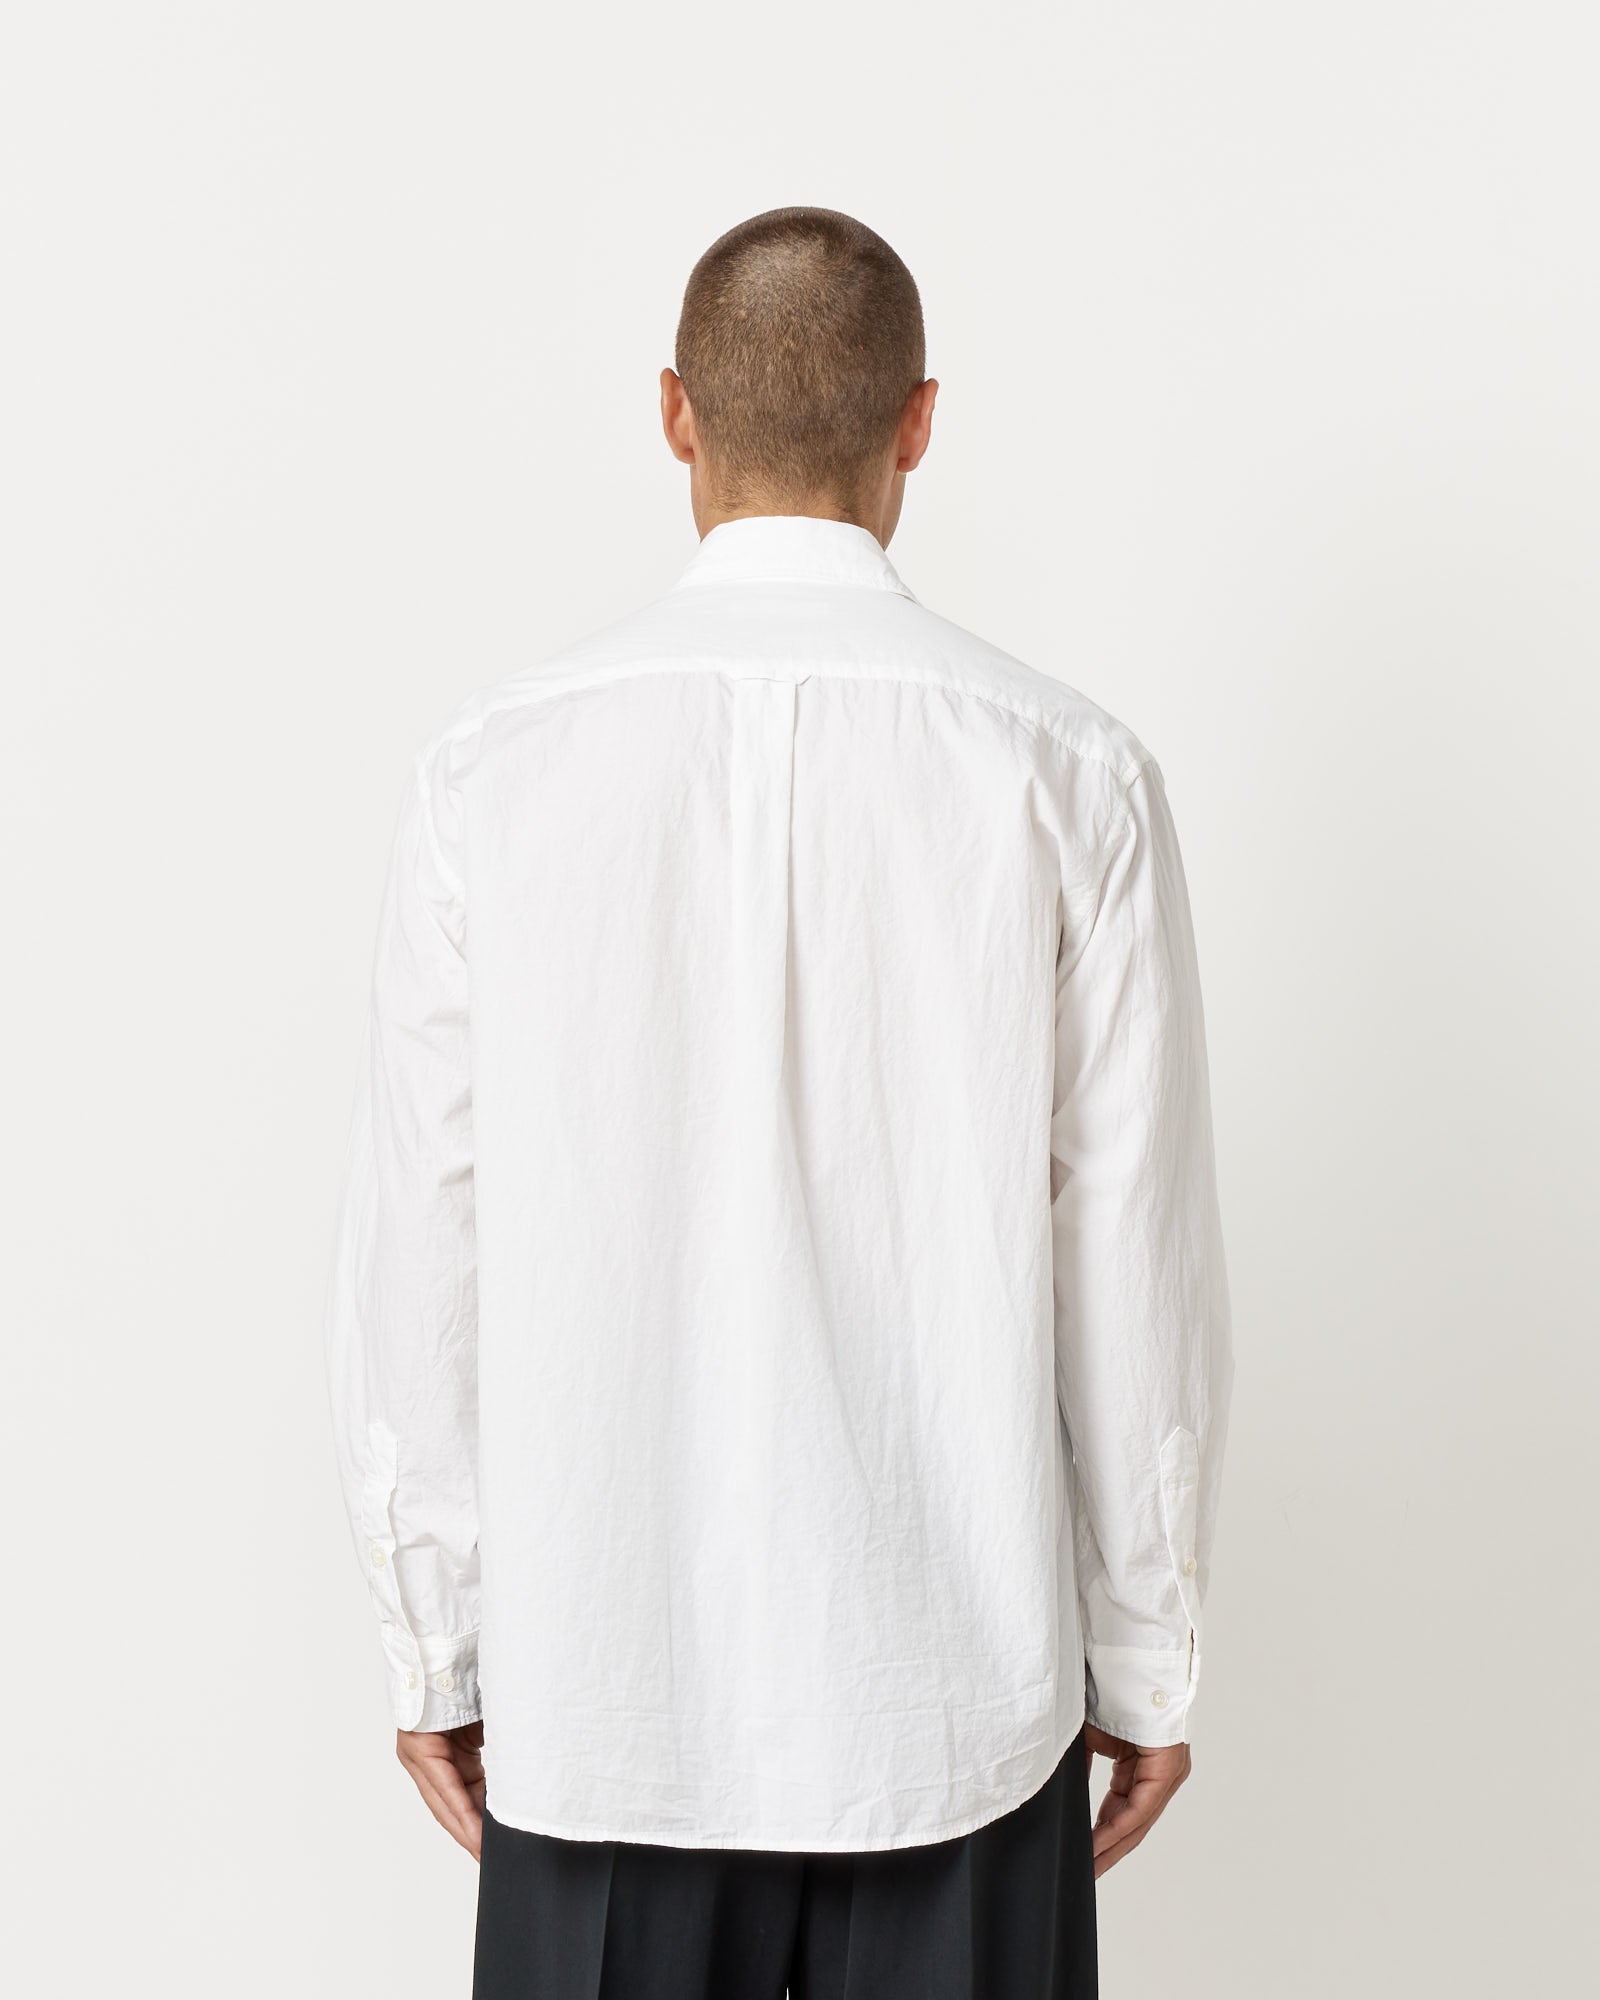 Gio Shirt in Crushed Cotton White